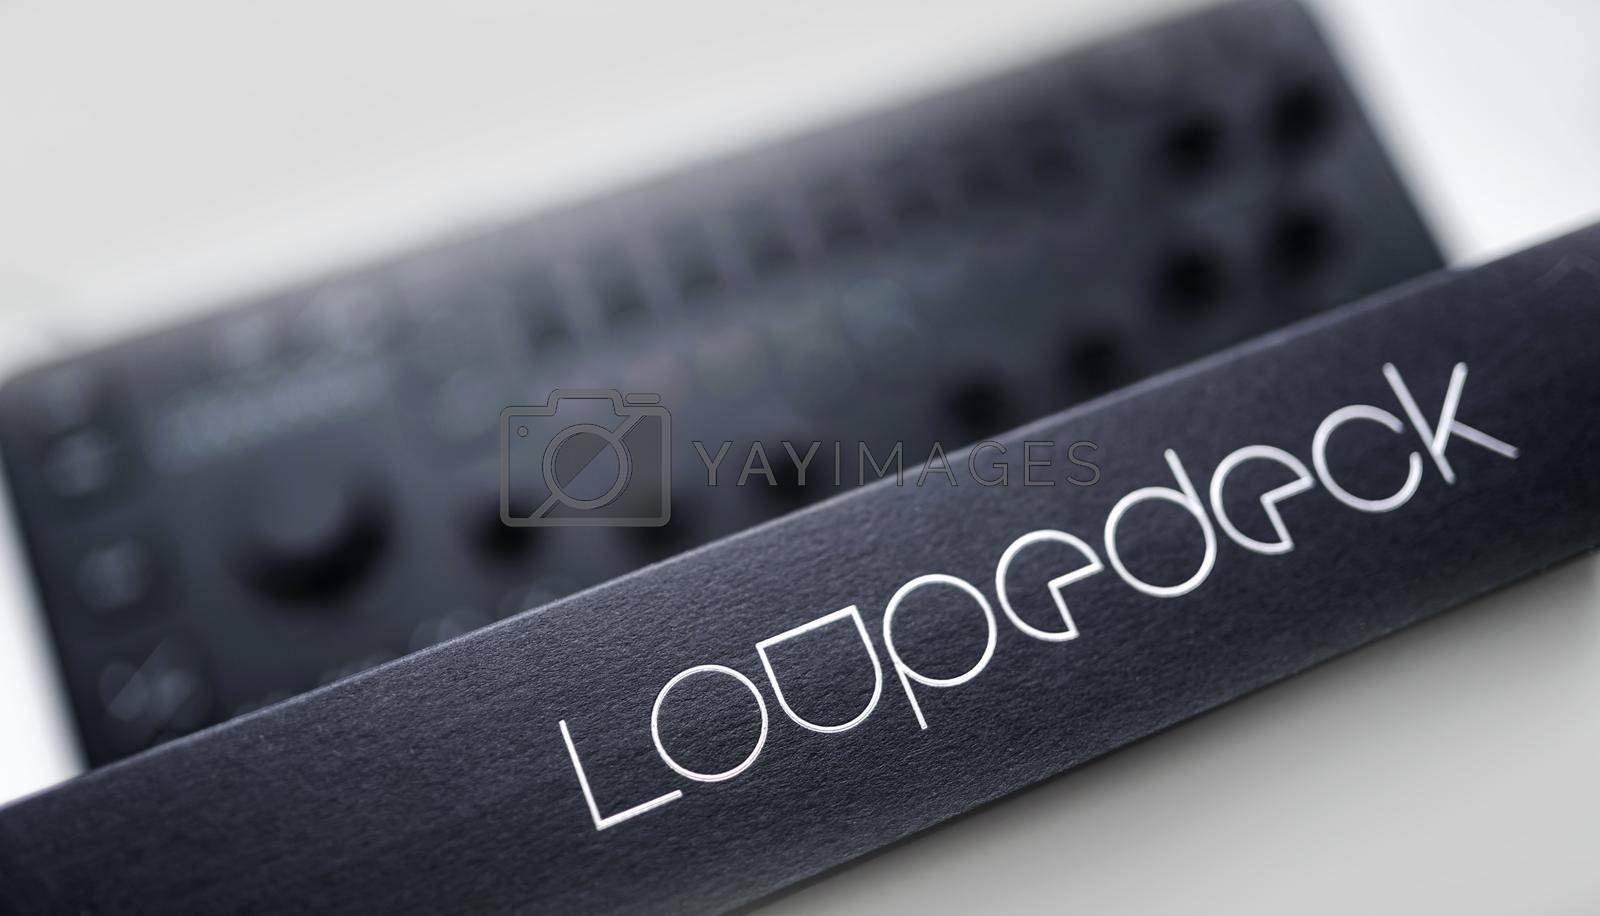 Royalty free image of Loupedeck Photo Editing Console by GekaSkr